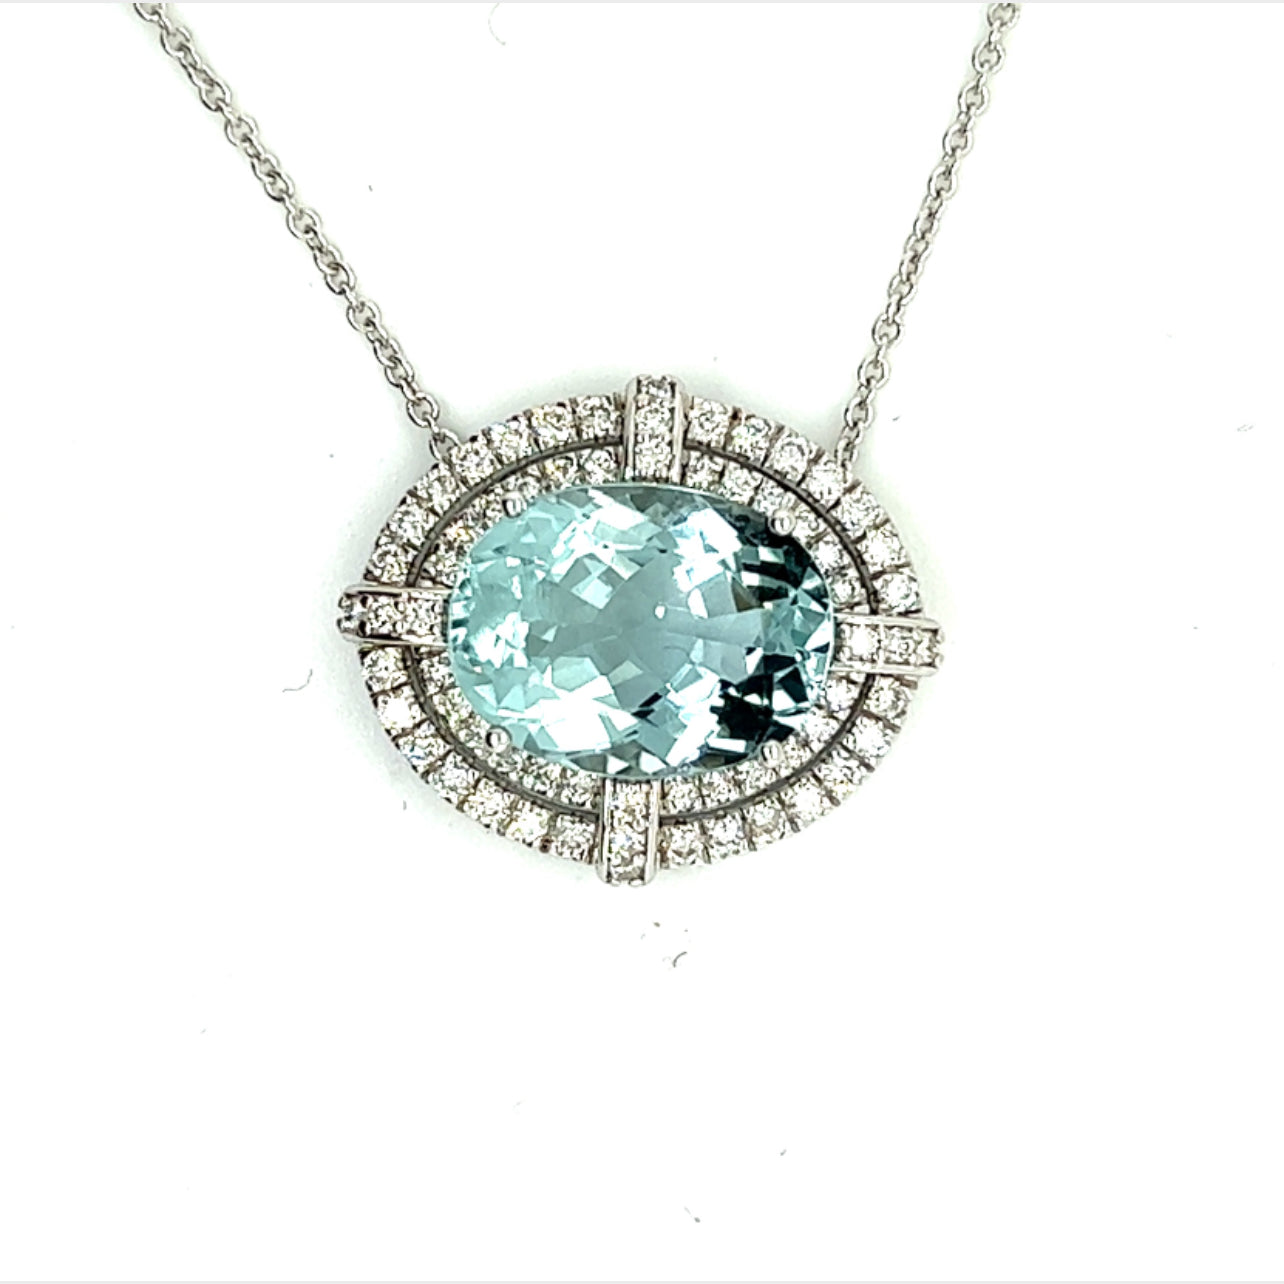 Natural Aquamarine Diamond Pendant With Chain 17.5" 14k W Gold 7.09 TCW Certified $6,490 217088